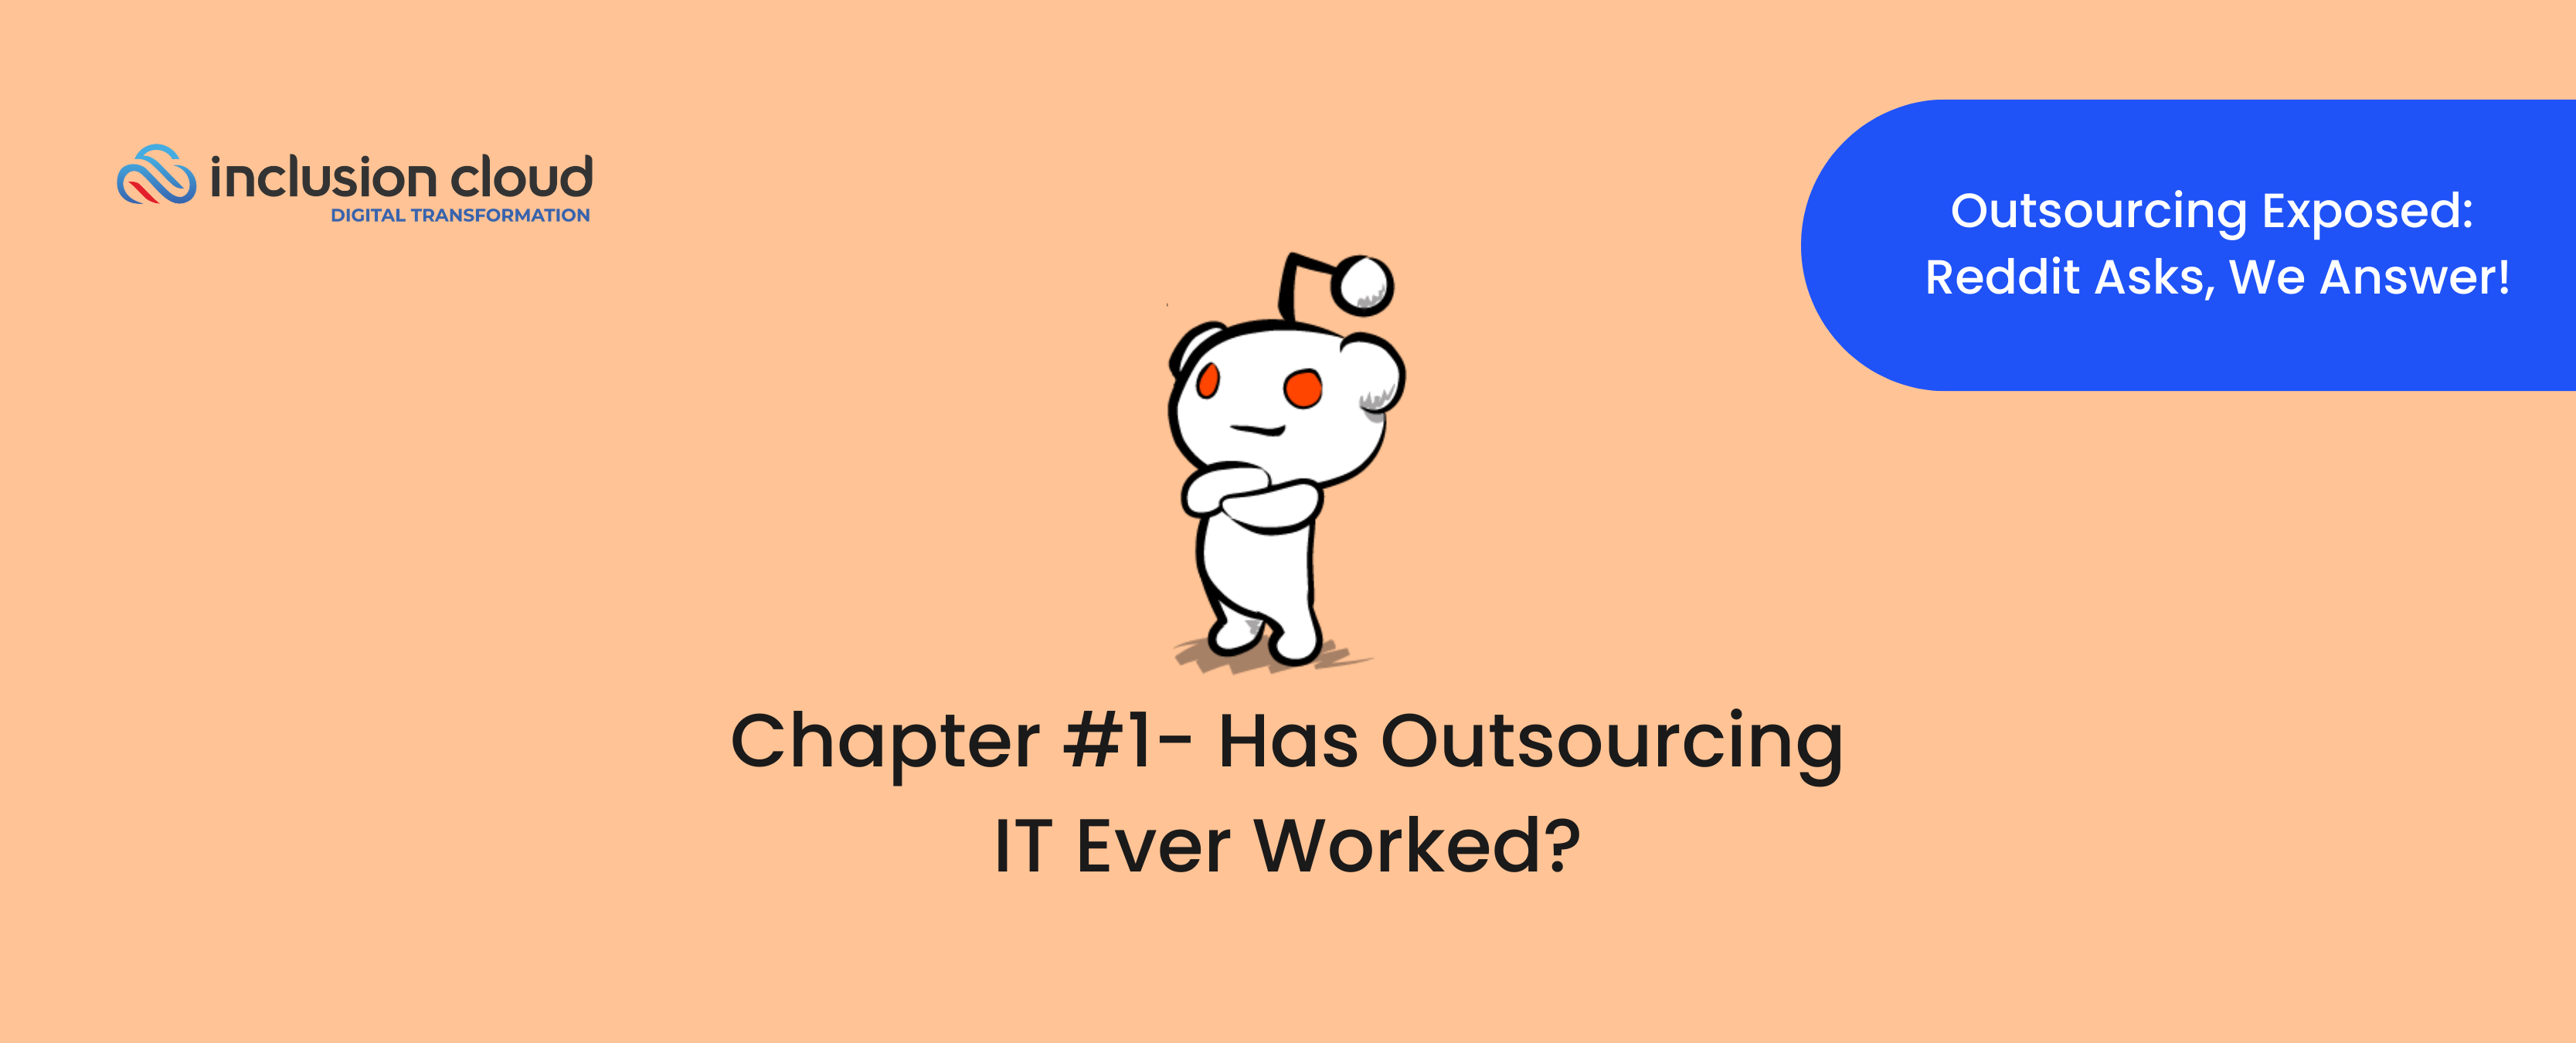 Outsourcing Exposed - Reddit Ask We Answer